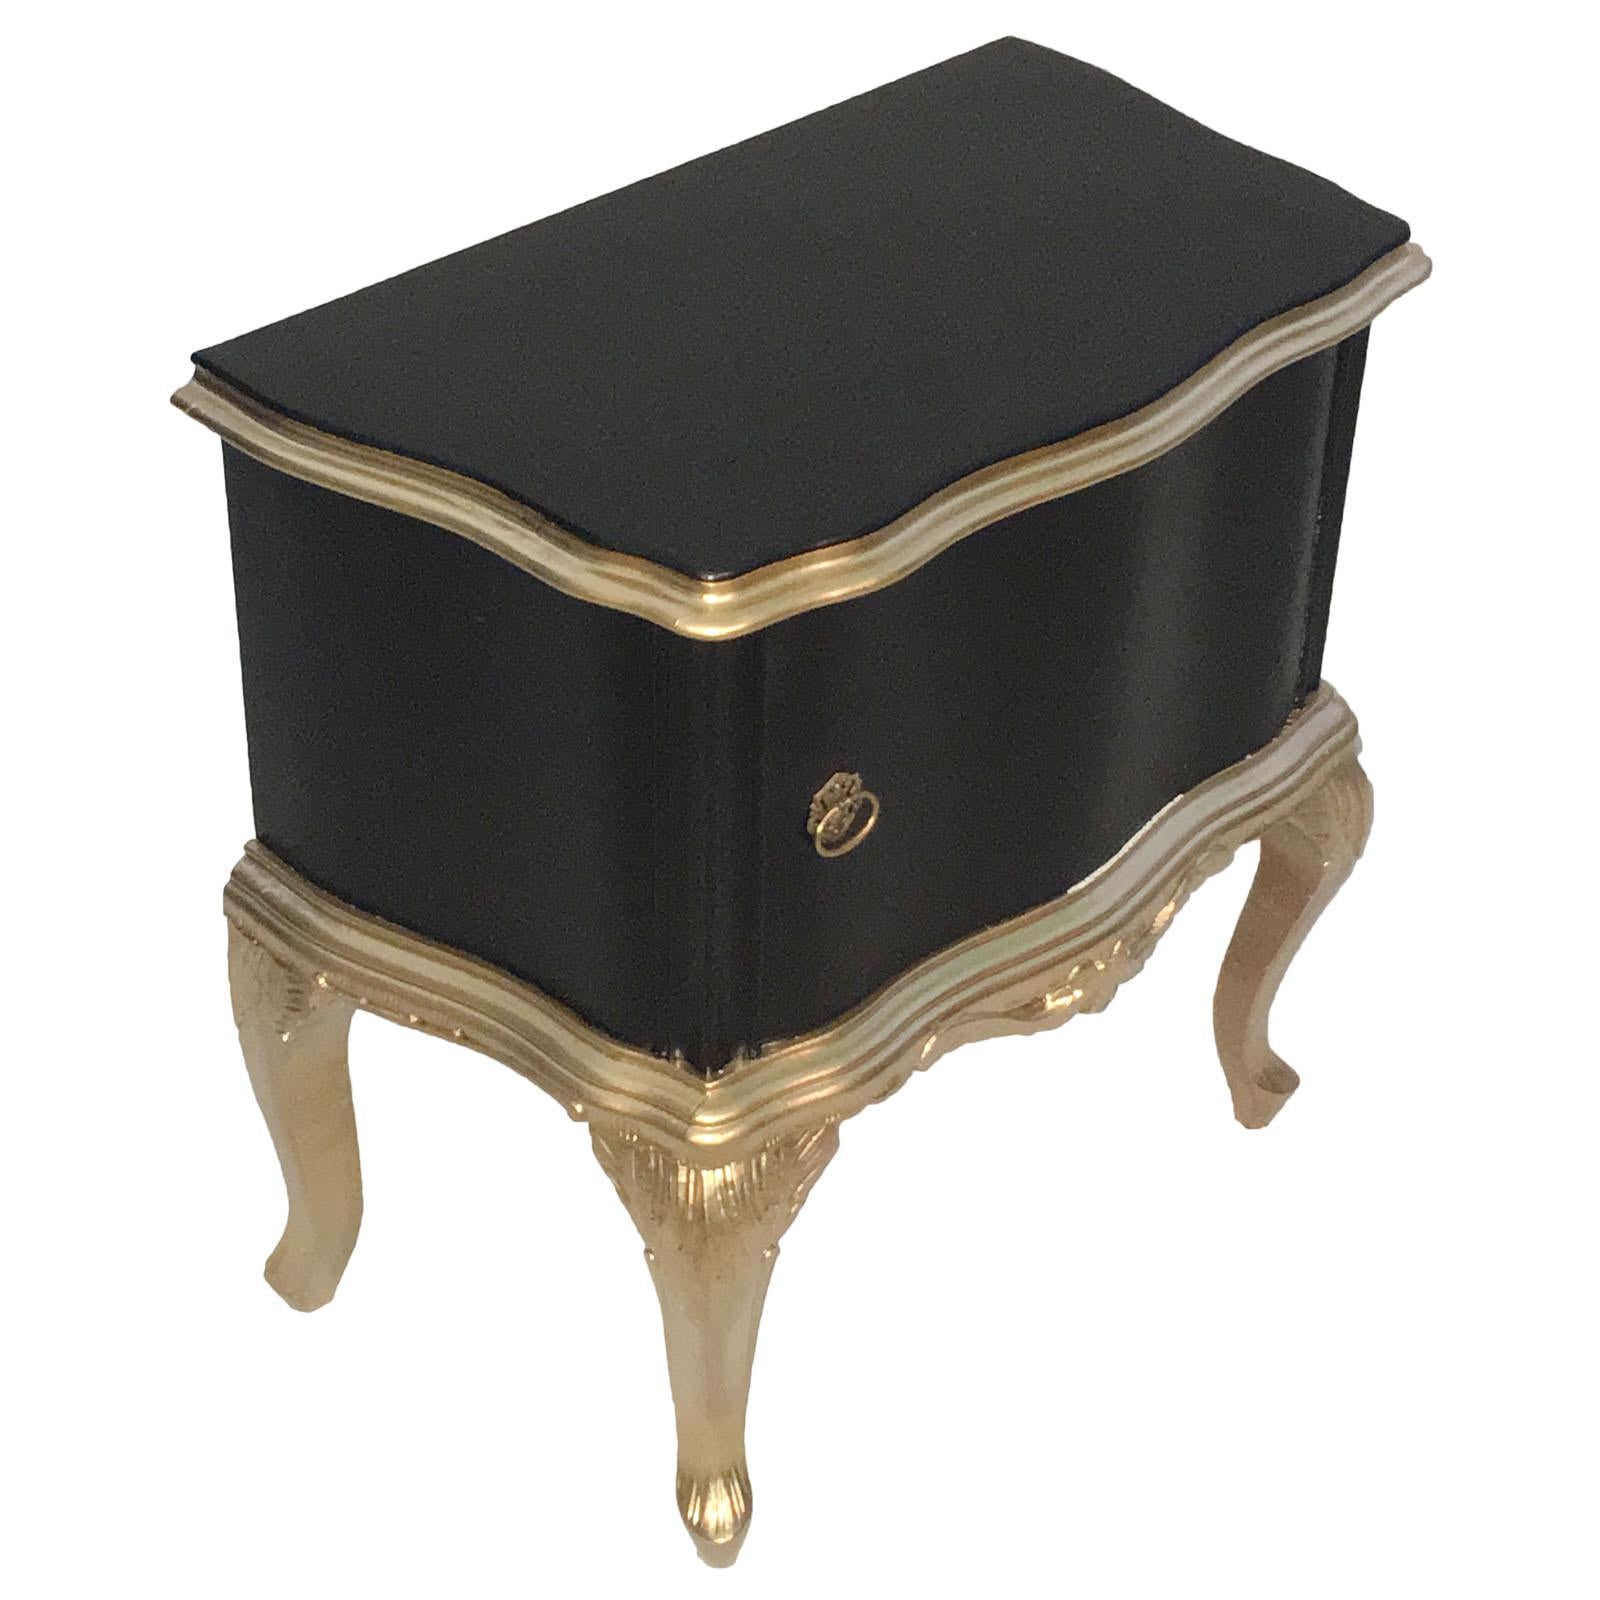 Pair of early 20th century Venetian Baroque nighstands in massive gilt hand-carved walnut, black laquered. Gilt bronze handle. Restored and polished to wax.

Measure cm: H 64 x W 63 x D 37.